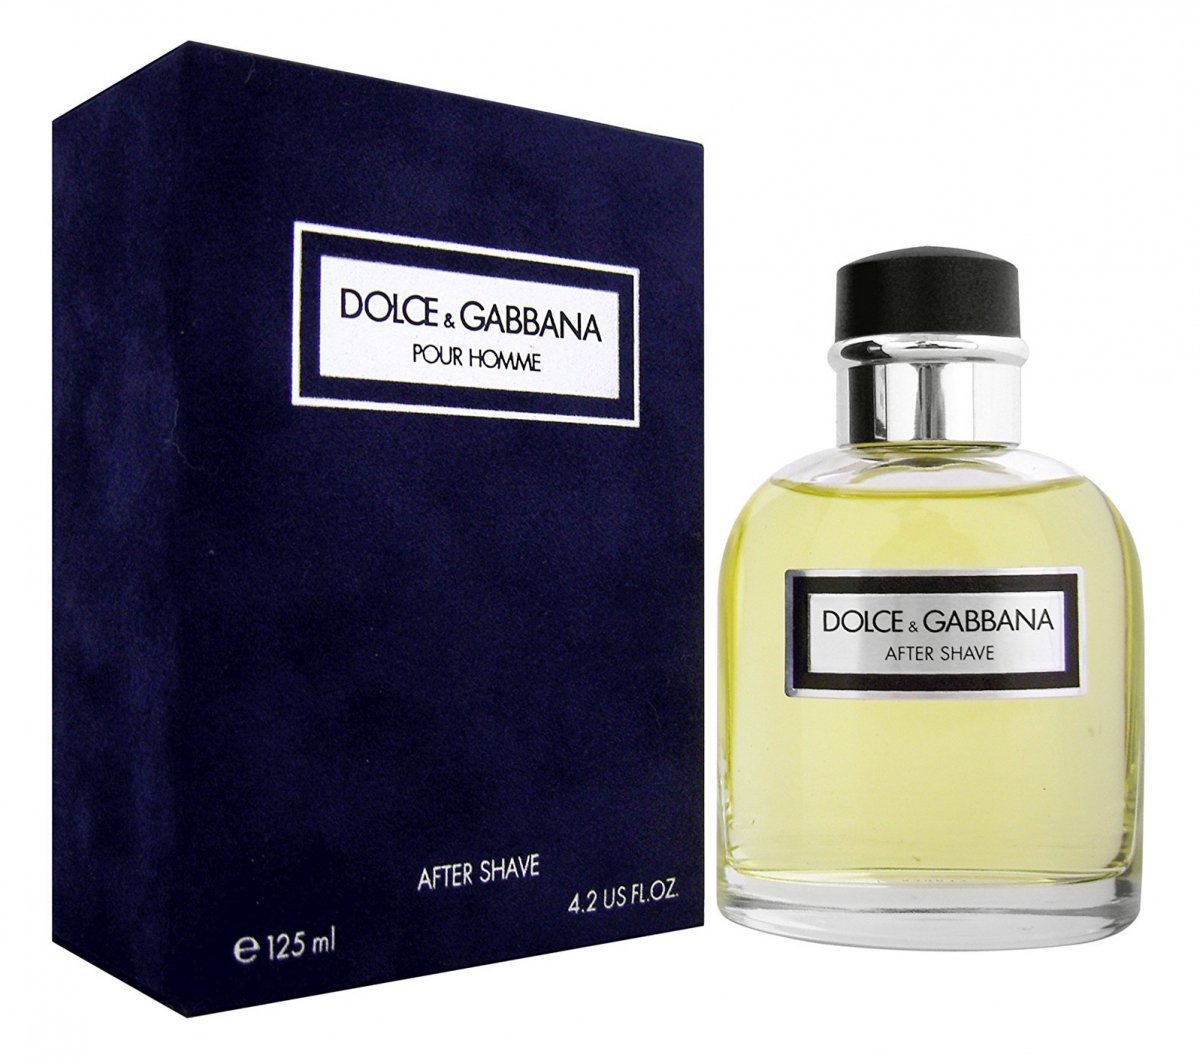 Dolce & Gabbana - pour Homme 1994 After Shave » Reviews & Perfume Facts